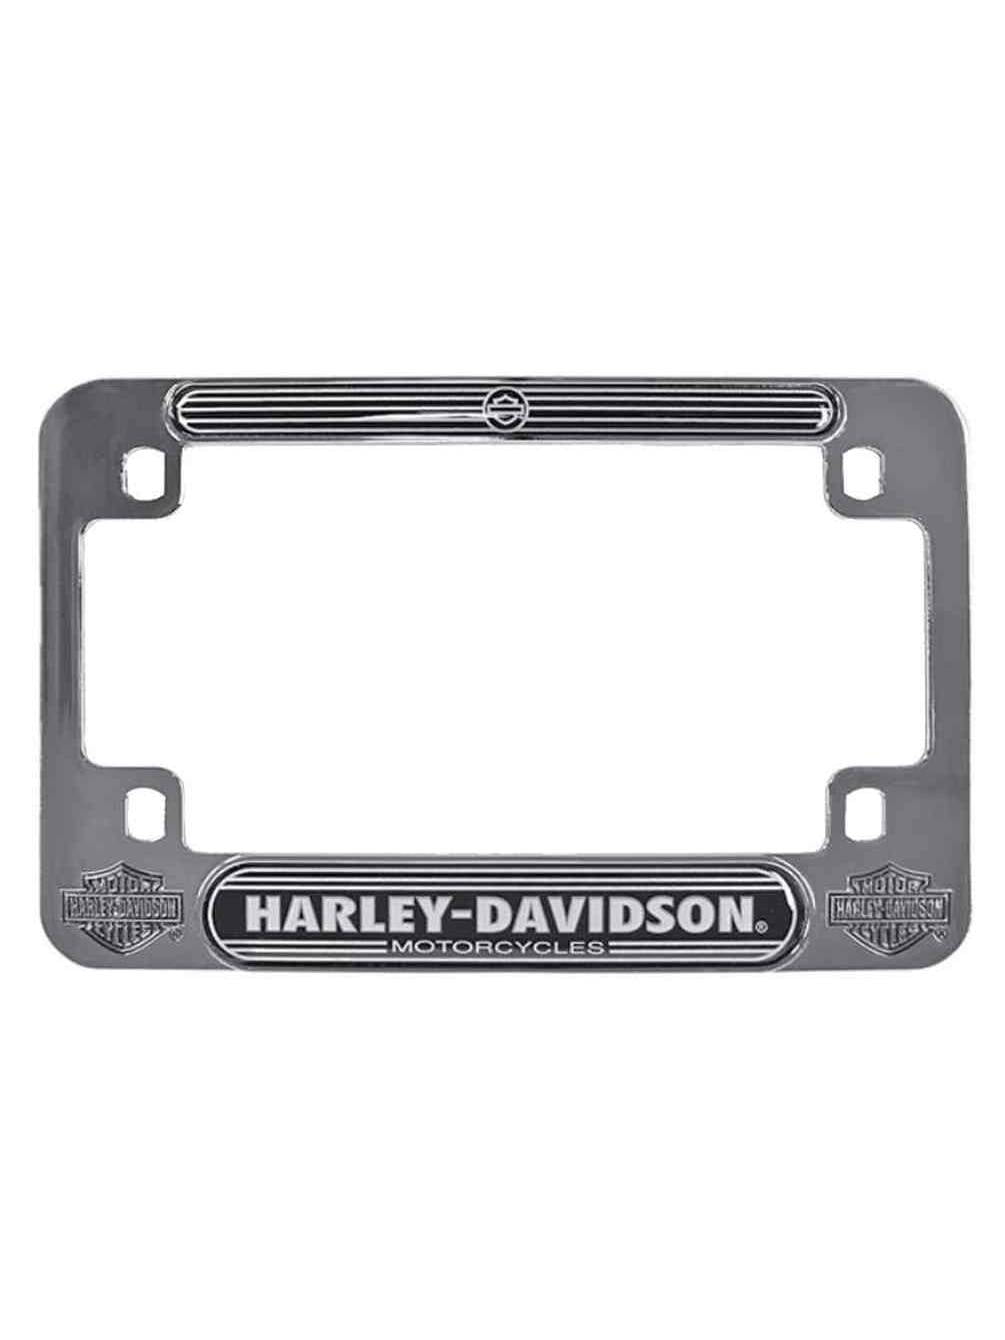 1933 FORD LICENSE PLATE FRAME CHROME FINISHED WITH FORD SCRIPT